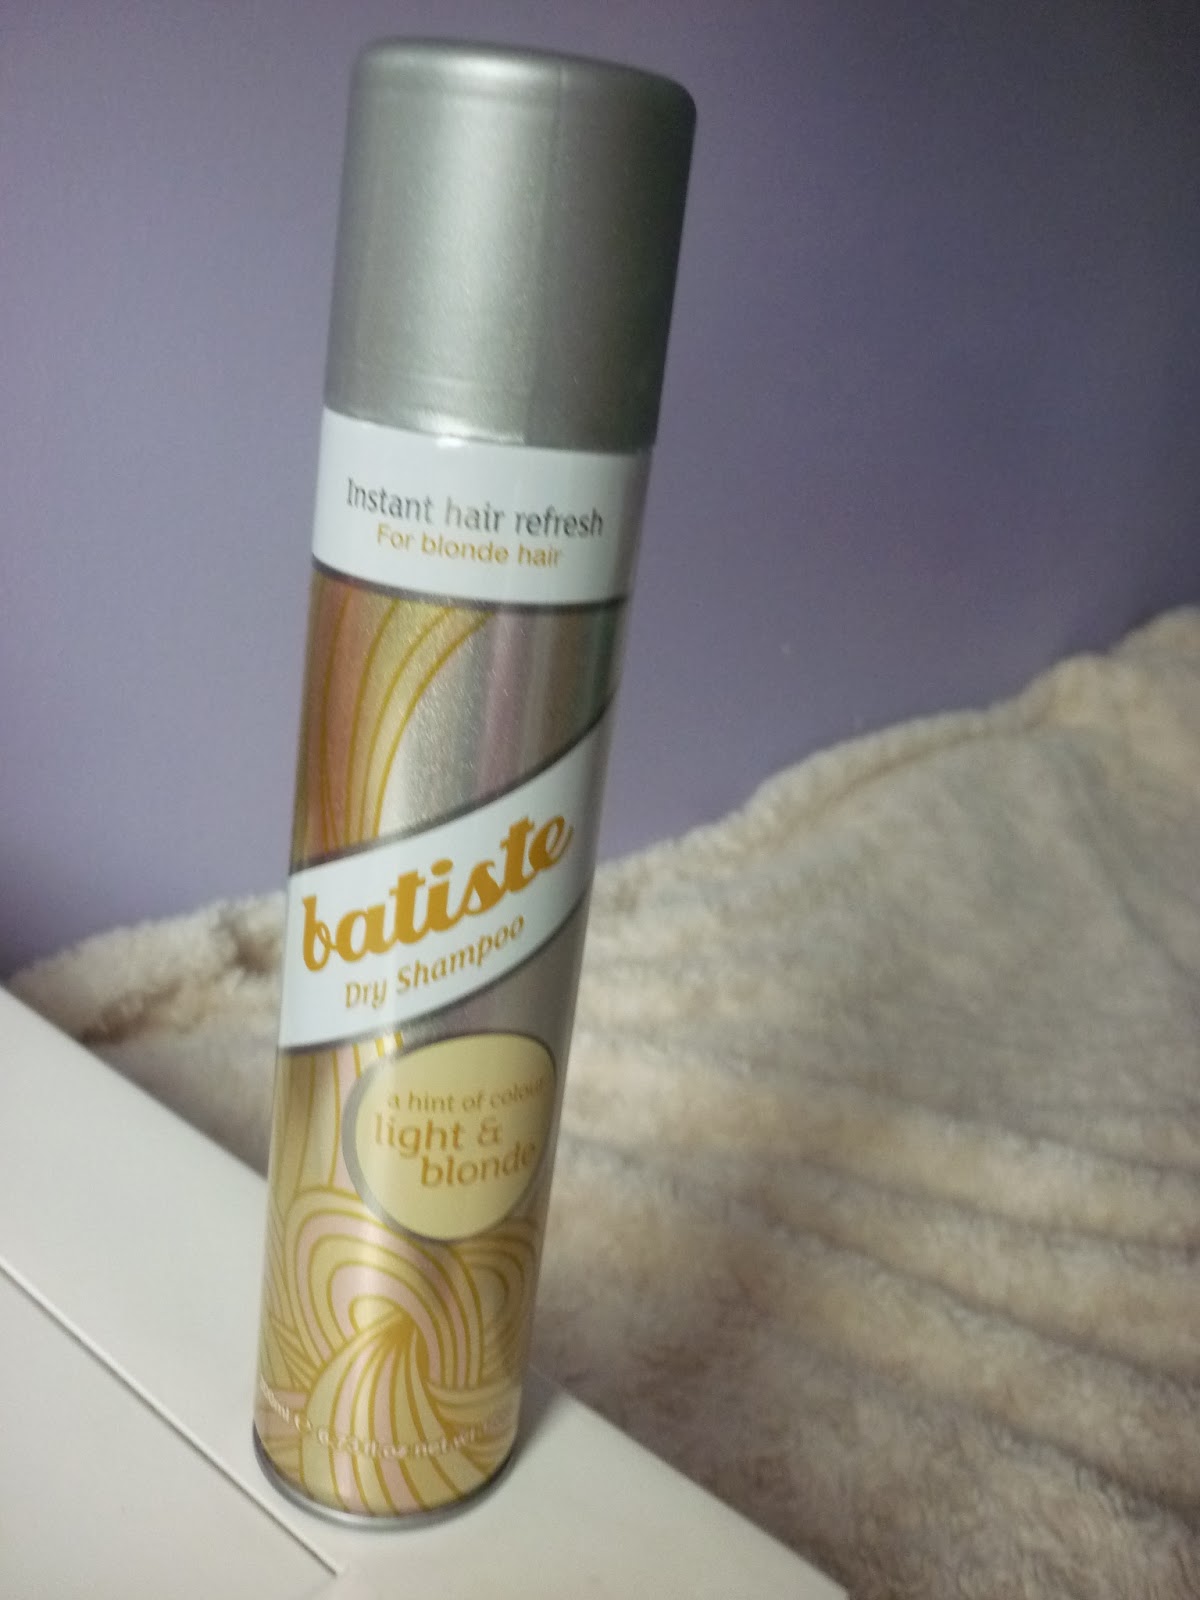 Wishing For Treats Batiste Dry Shampoo Light And Blonde